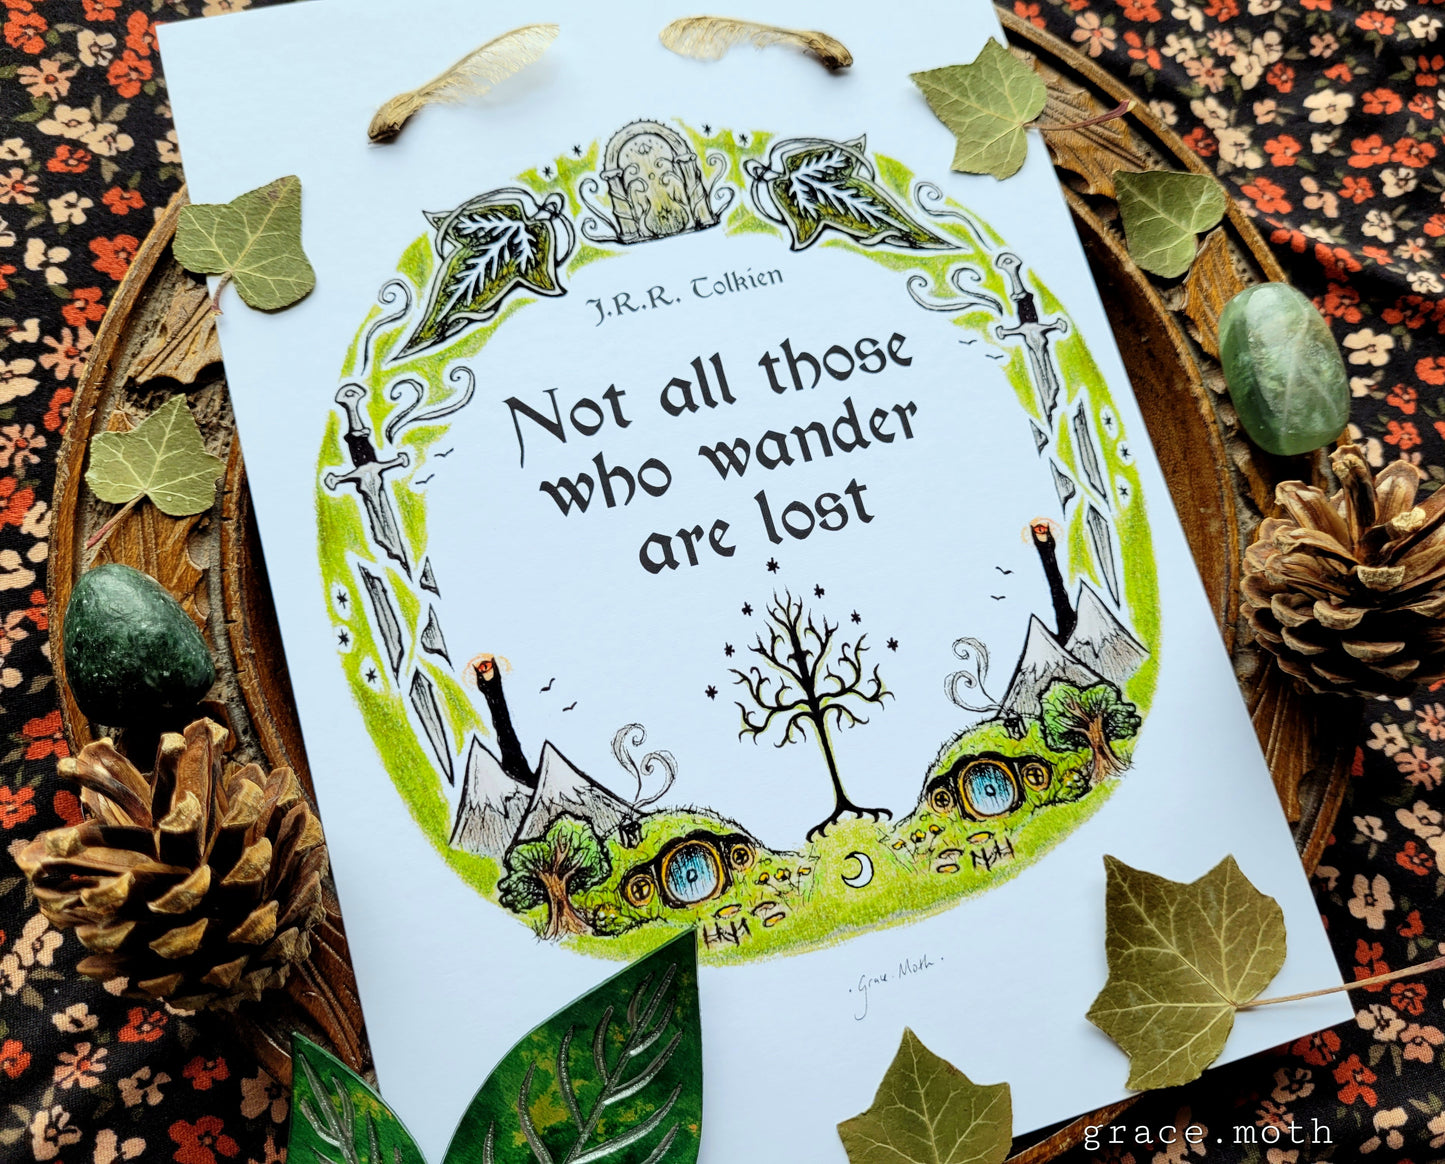 Lord of the Rings quote "Not all those who wander are lost" - A5 or A4 art print illustrated by Grace Moth - Cottagecore - Witchy - Gothic